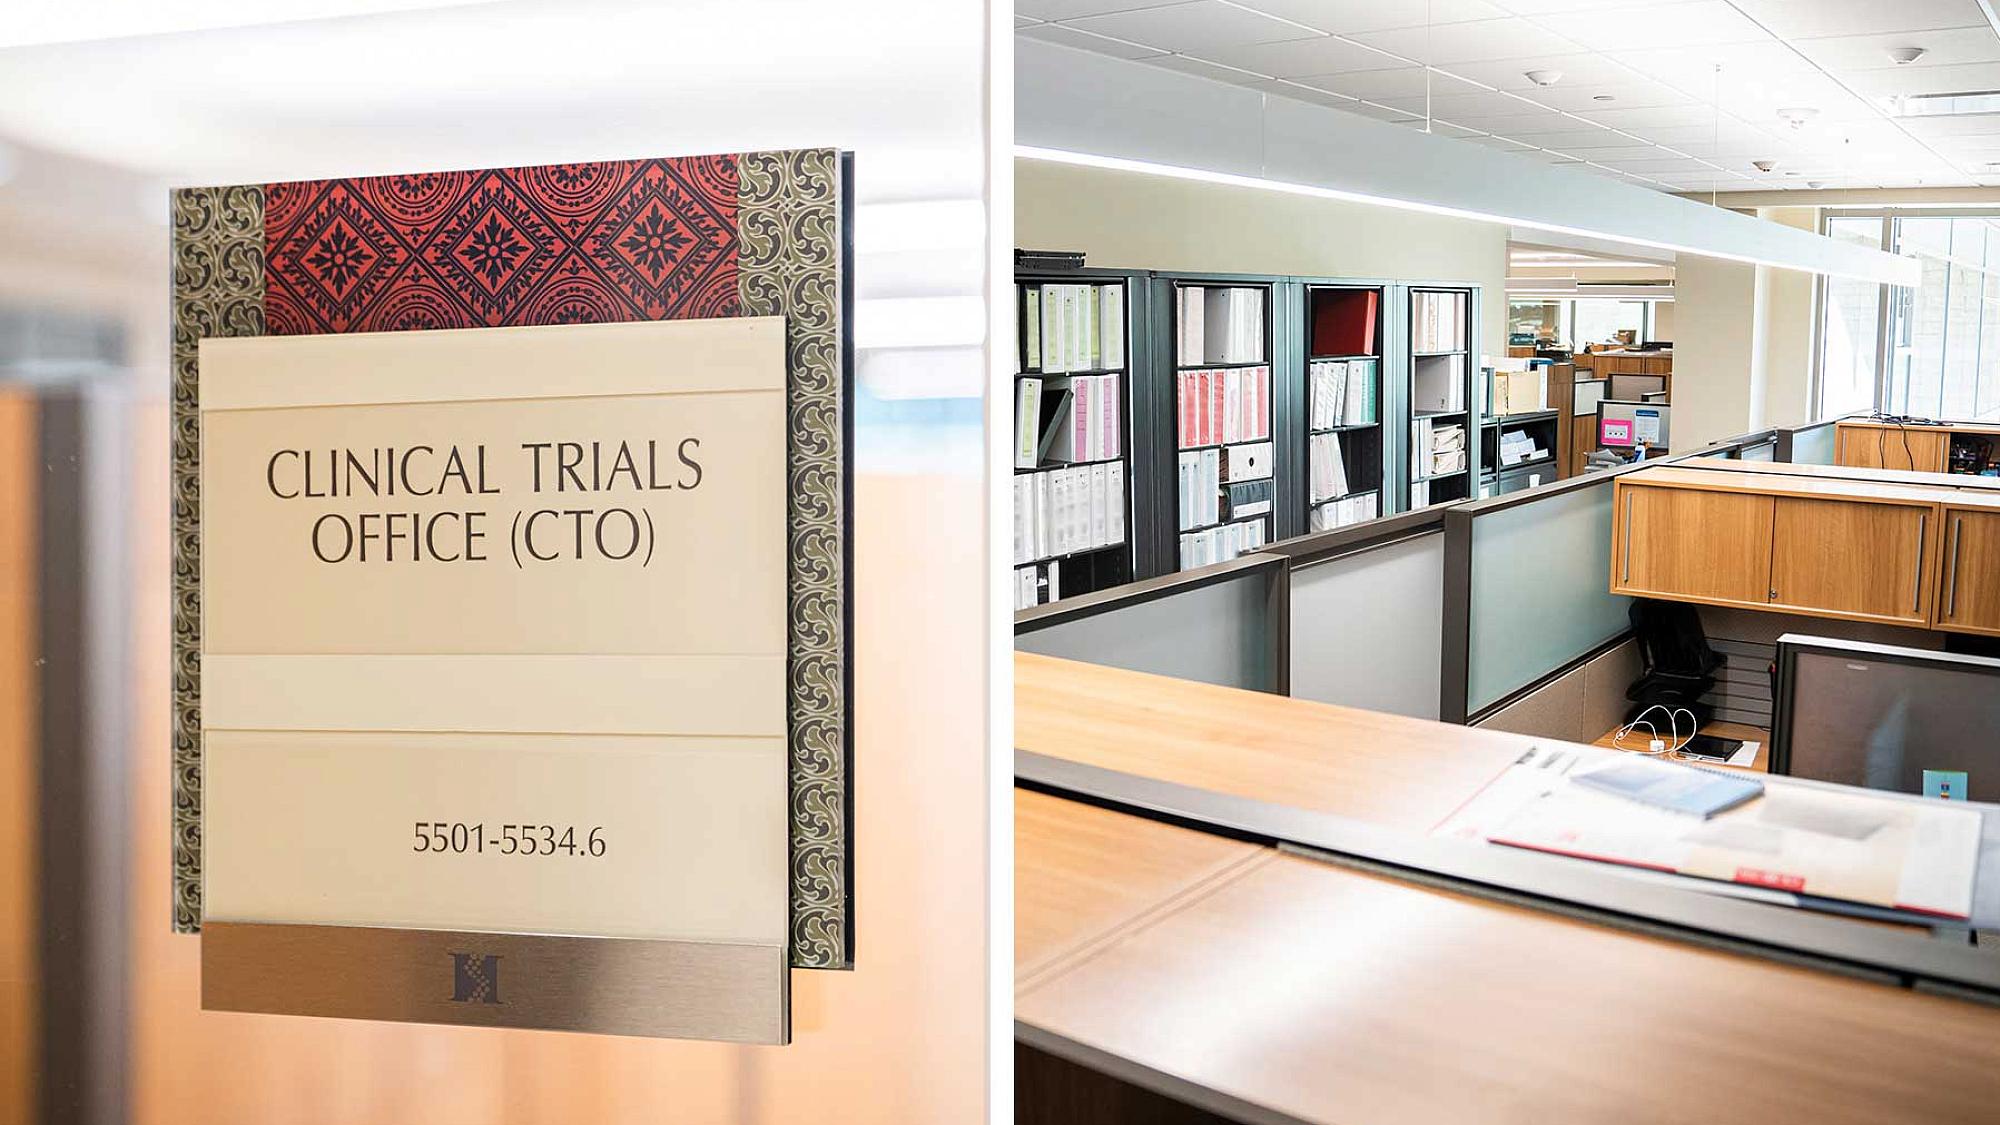 Clinical Trials Office entry plaque and cubical space